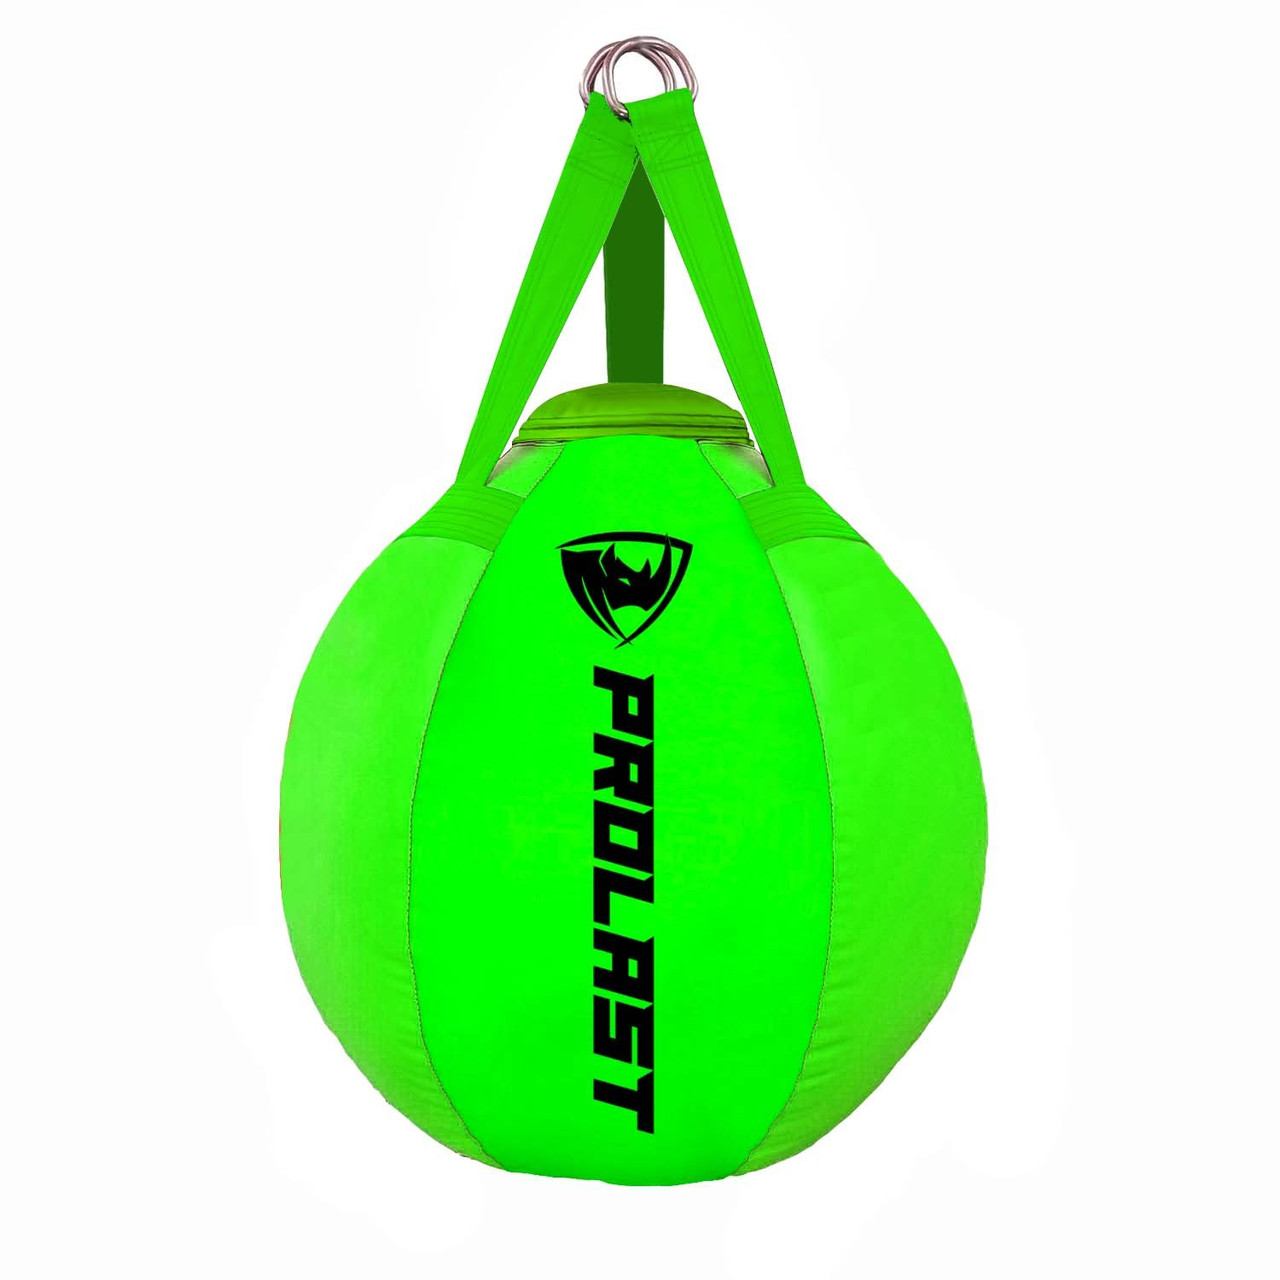 70lb Wrecking Ball Round Heavy Bag Lime Green Made in USA